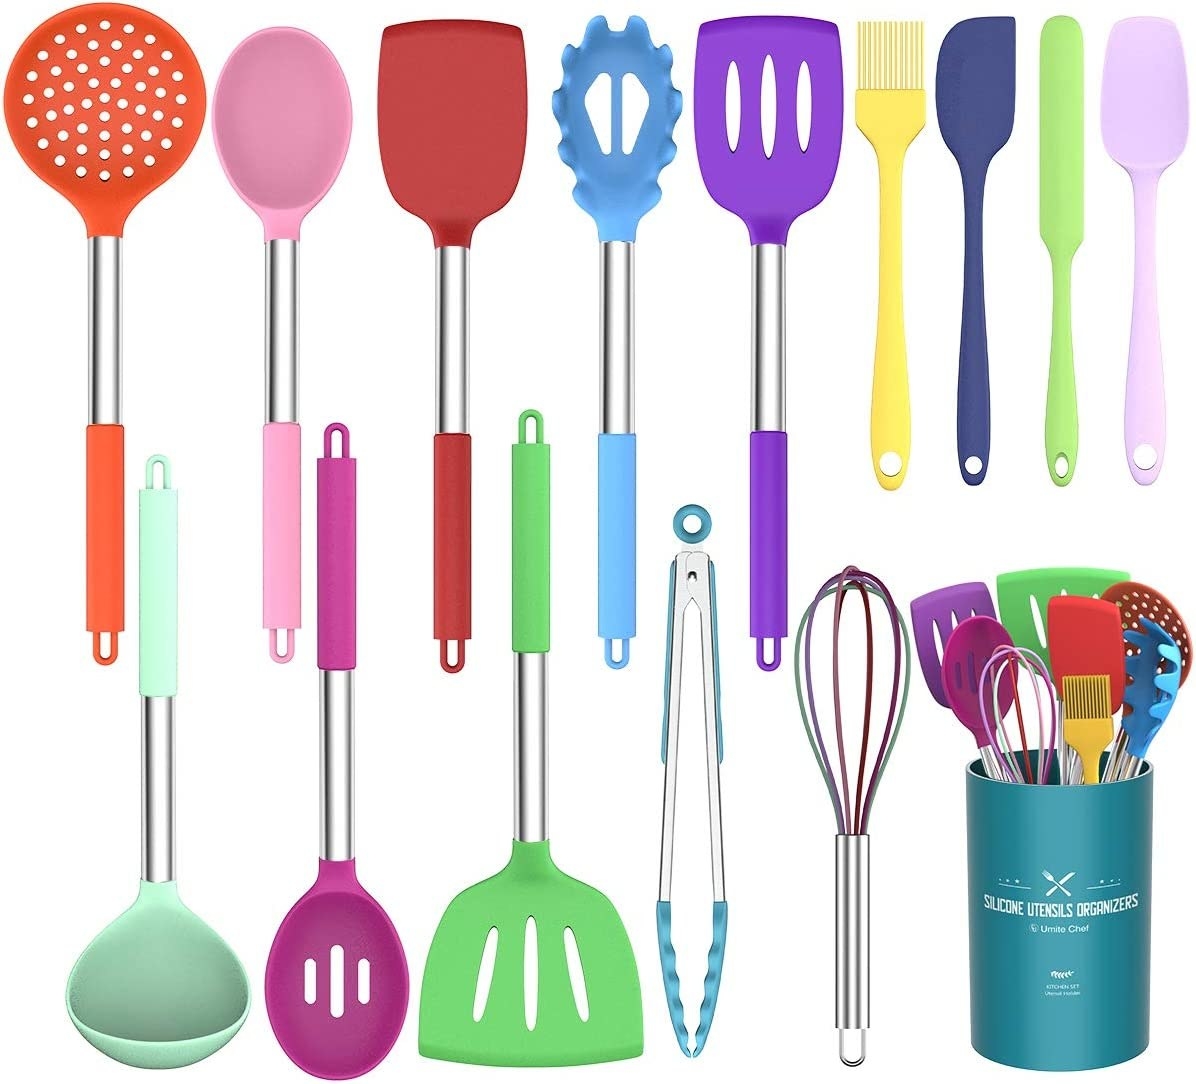 an array of colorful cooking utensils